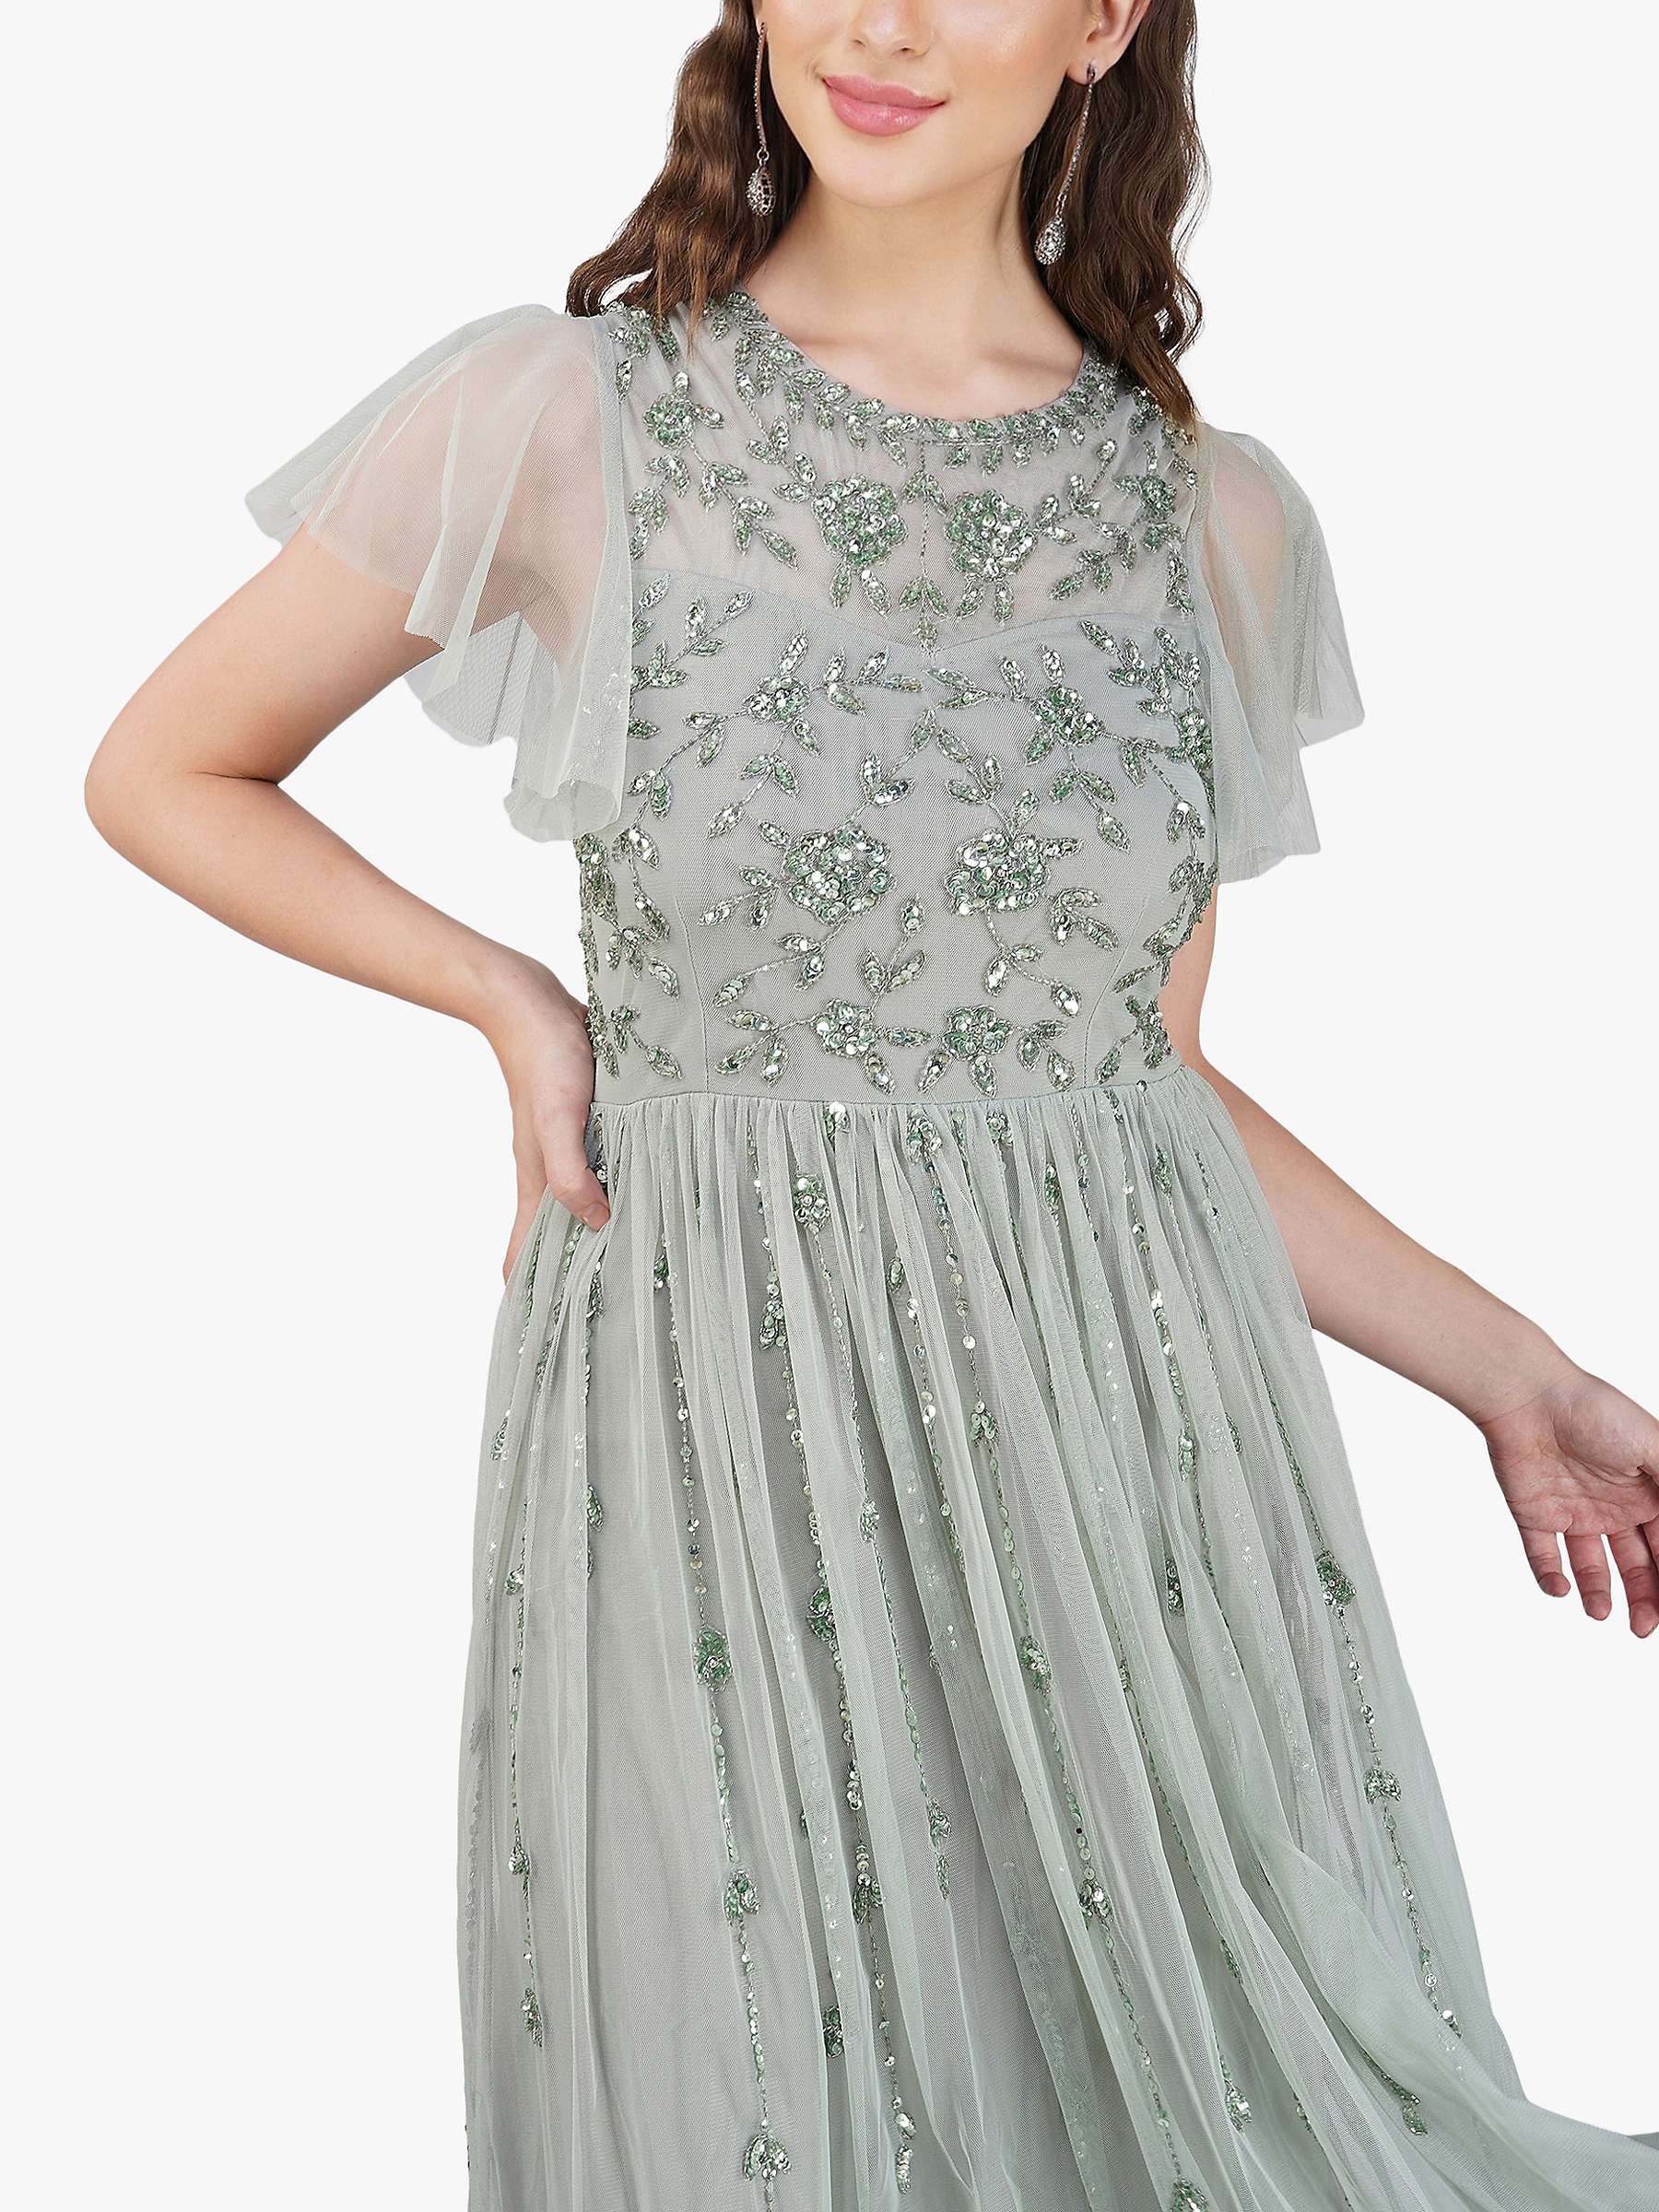 Buy Lace & Beads Marly Embellished Maxi Dress Online at johnlewis.com